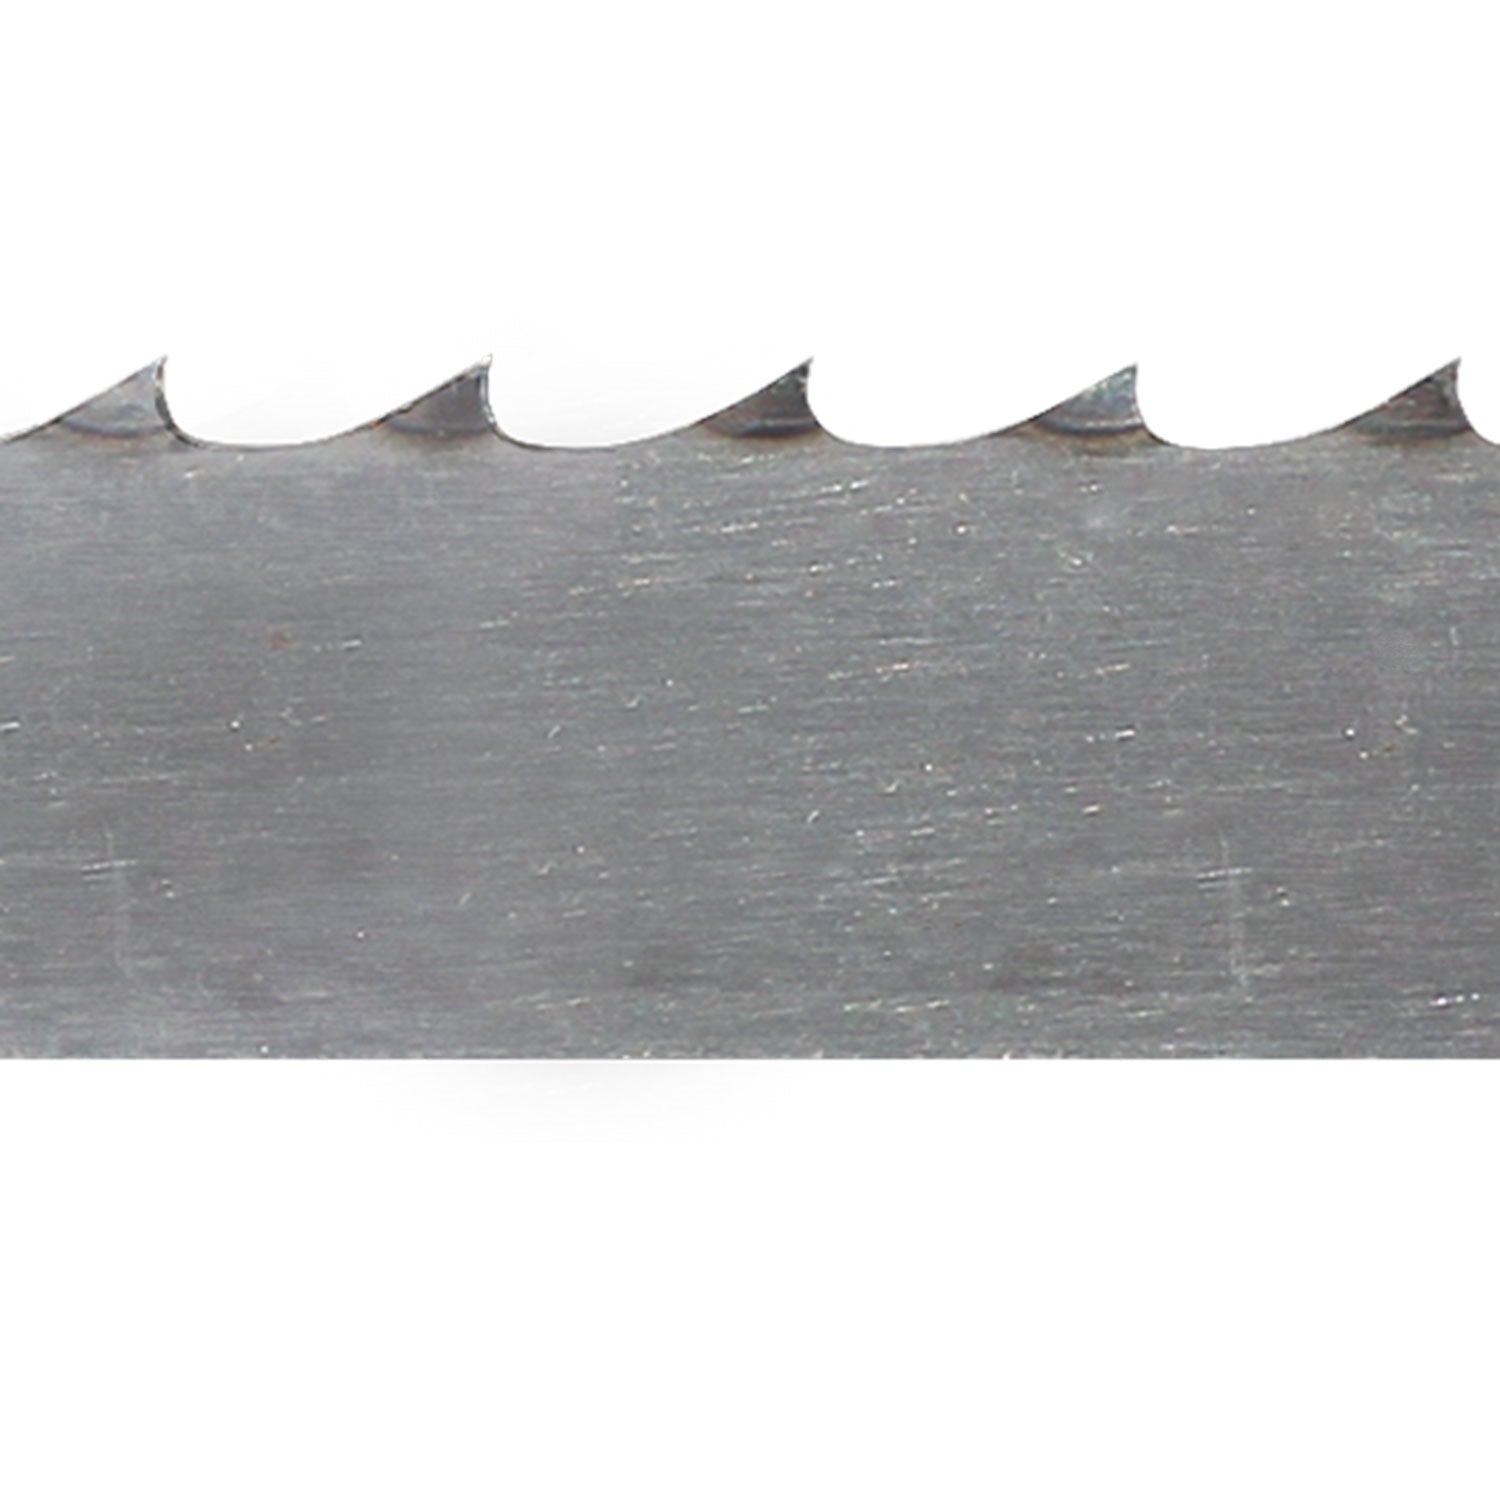 Meat Band Saw Blade - One Way® Portion Control - 126 in. x 5/8 in. x 0.022 in. x 3 TPI - Pack of 20